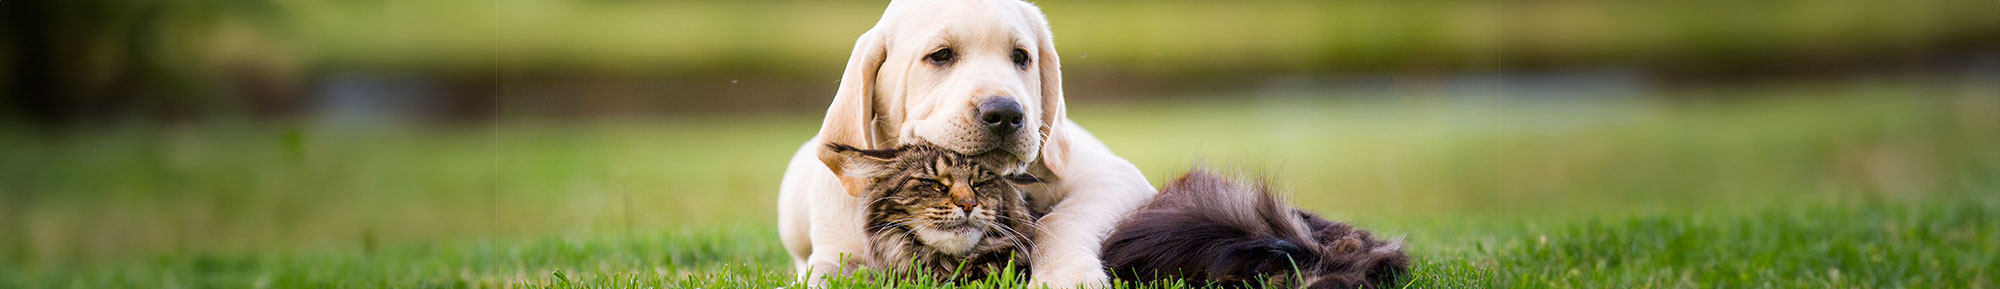 Dog with a Cat friend in a field